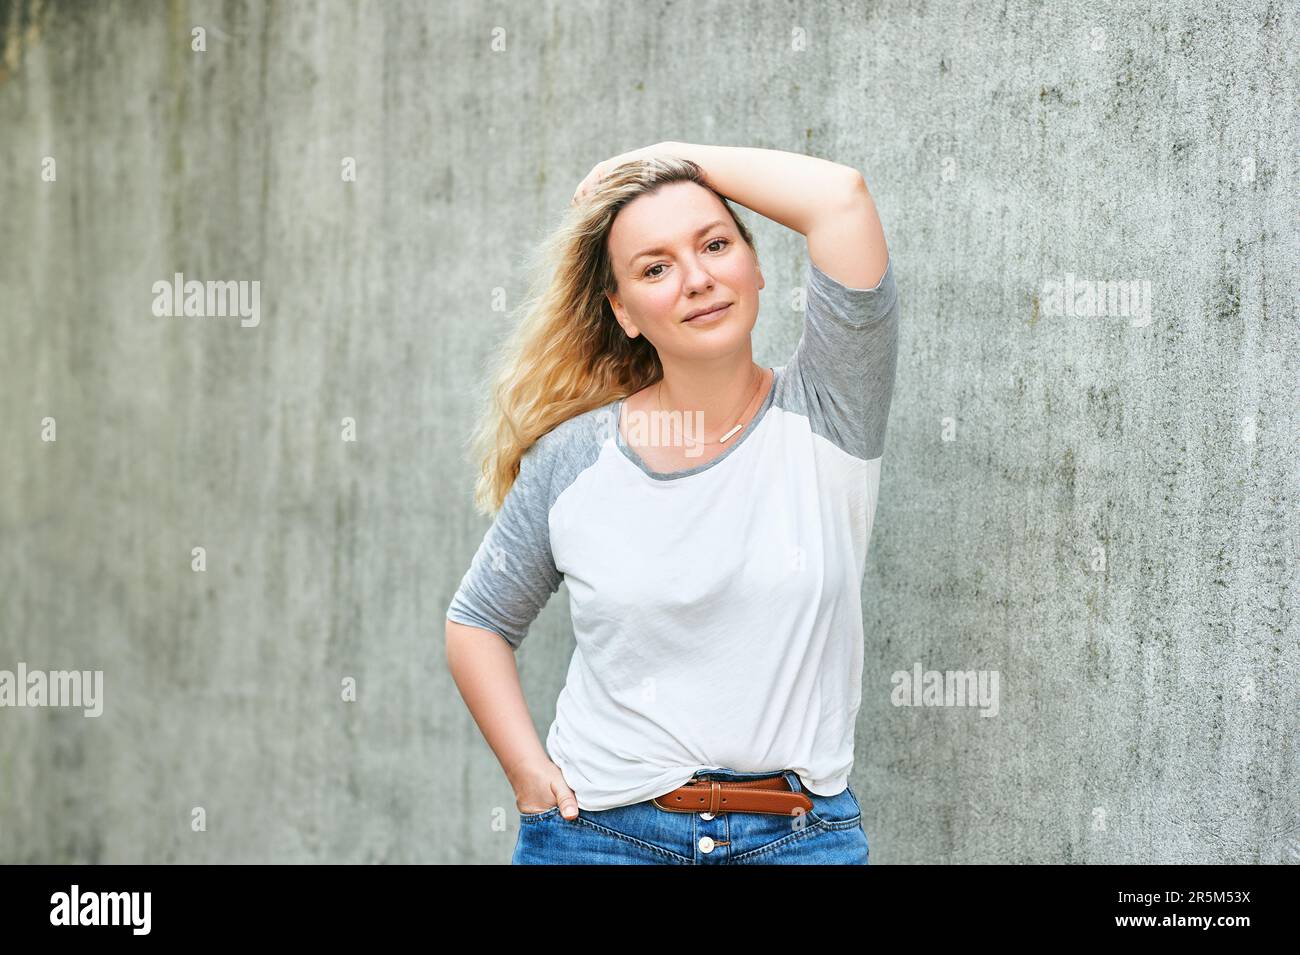 Outdoor portrait of pretty woman posing on grey urban background, wearing white t-shirt with grey sleeves Stock Photo